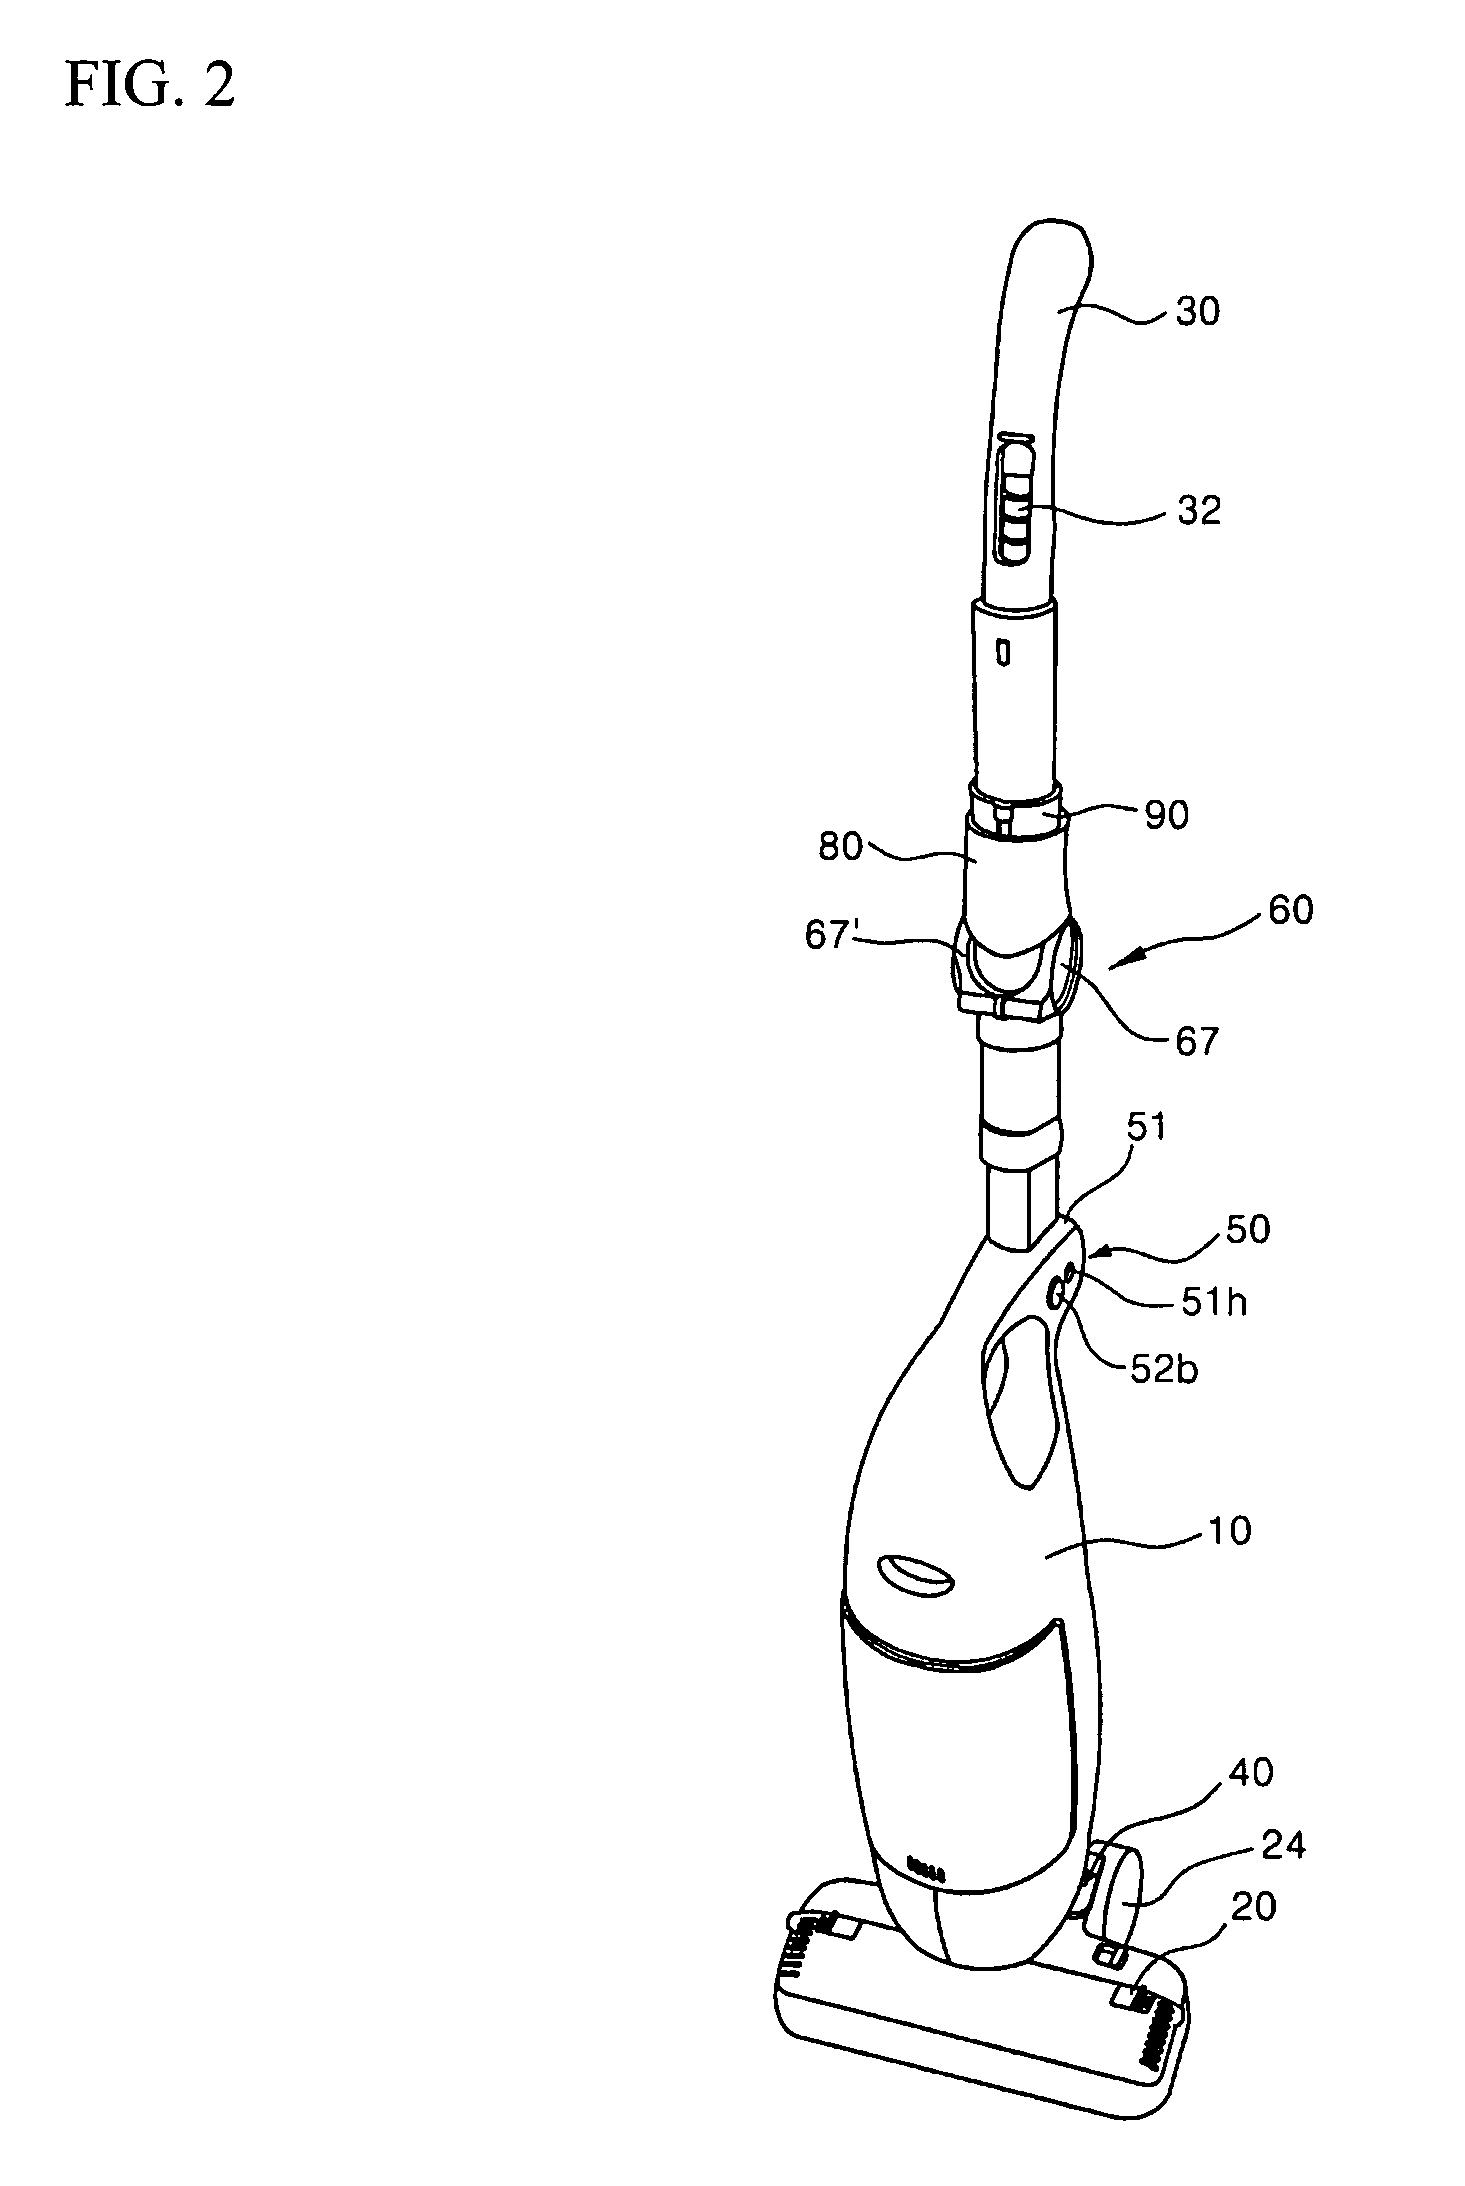 Upright type vacuum cleaner having multi joint portion